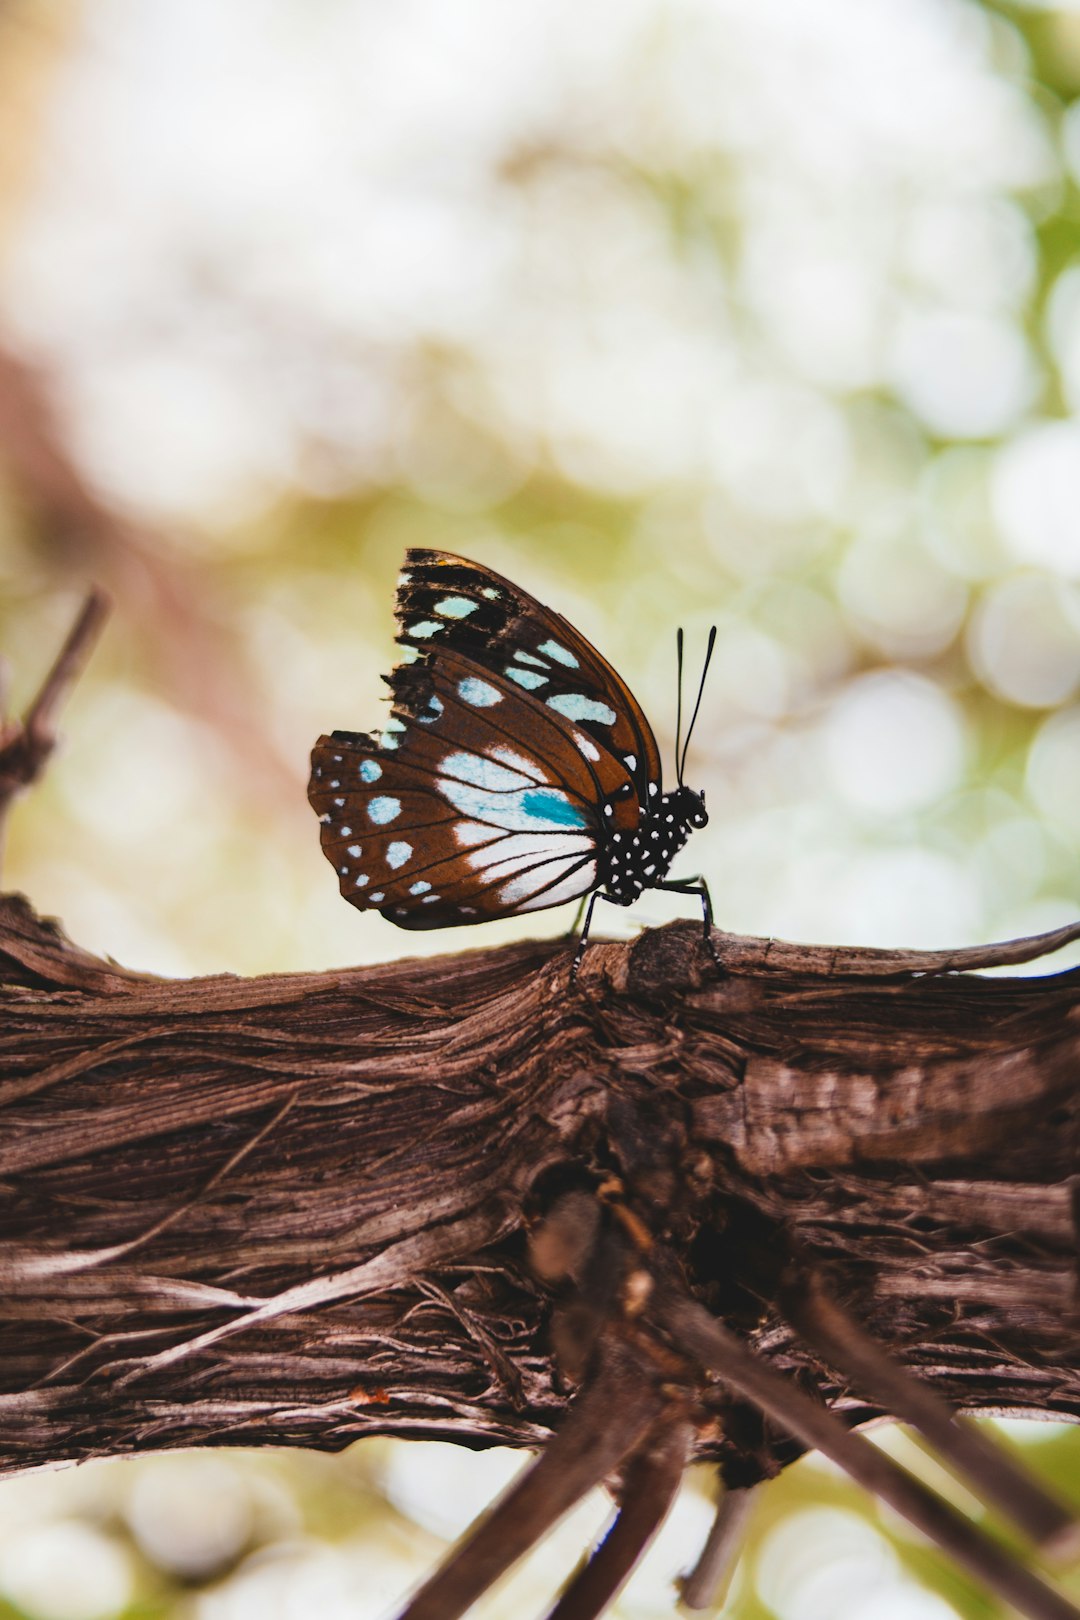 black white and blue butterfly perched on brown tree branch in close up photography during daytime